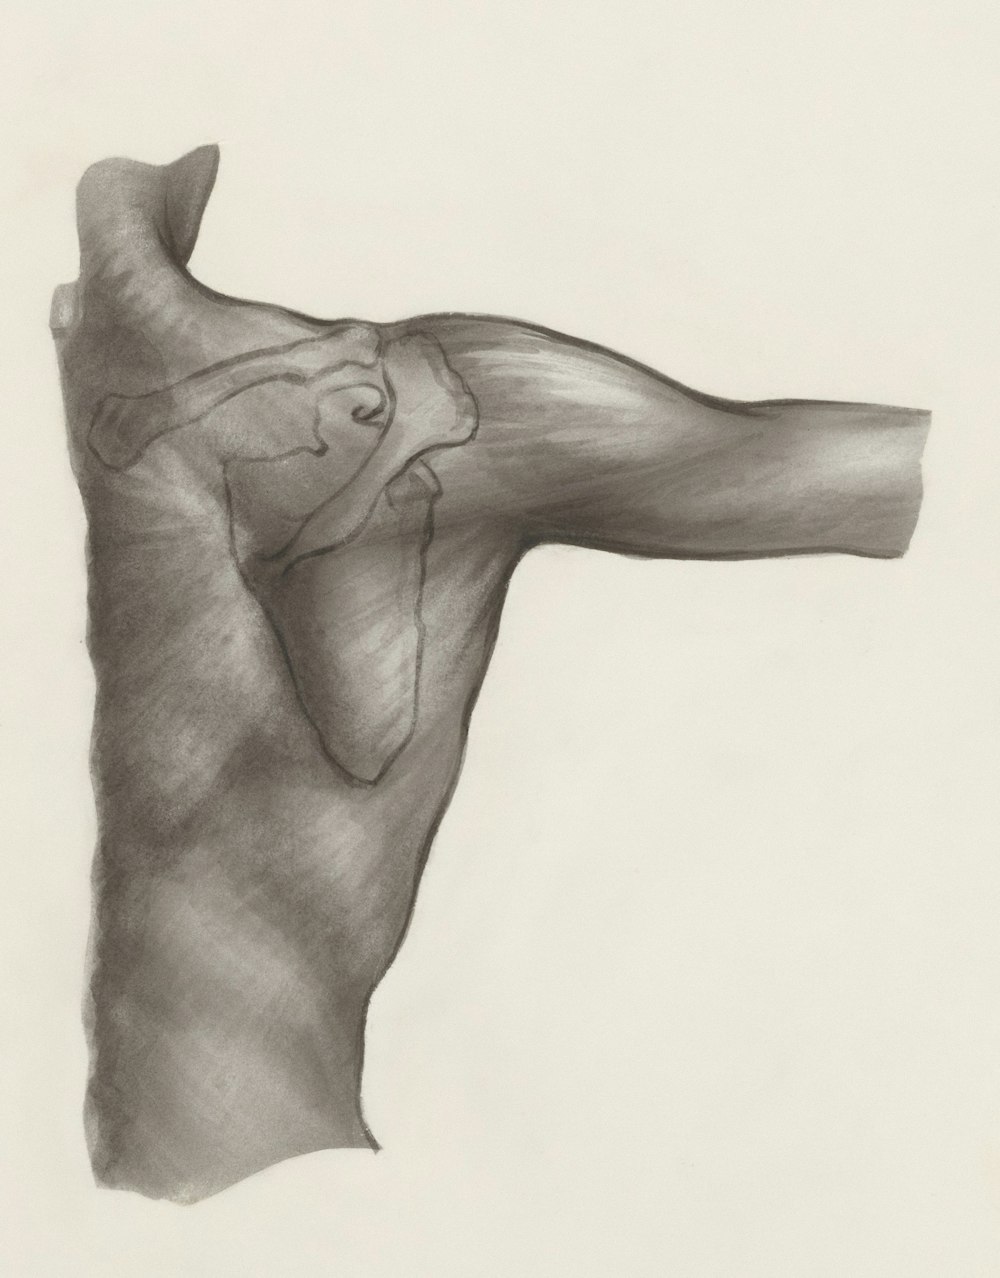 a black and white drawing of a person's arm